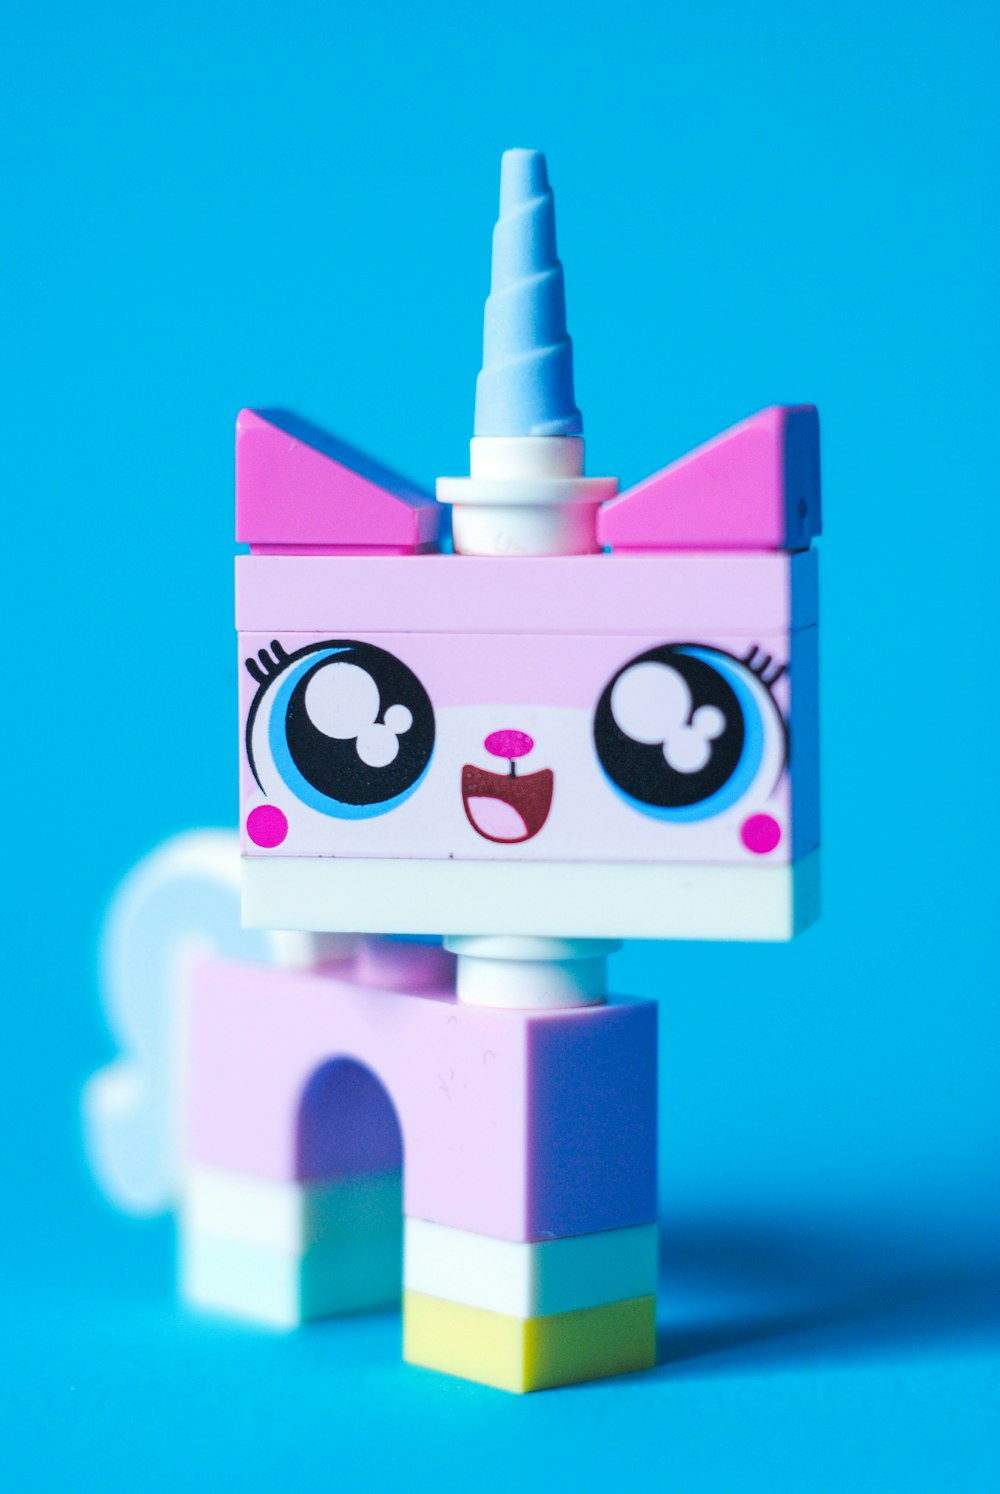 27 Unicorn Pictures Download Free Images On Unsplash - kawaii roblox unicorn girl roblox free clothes